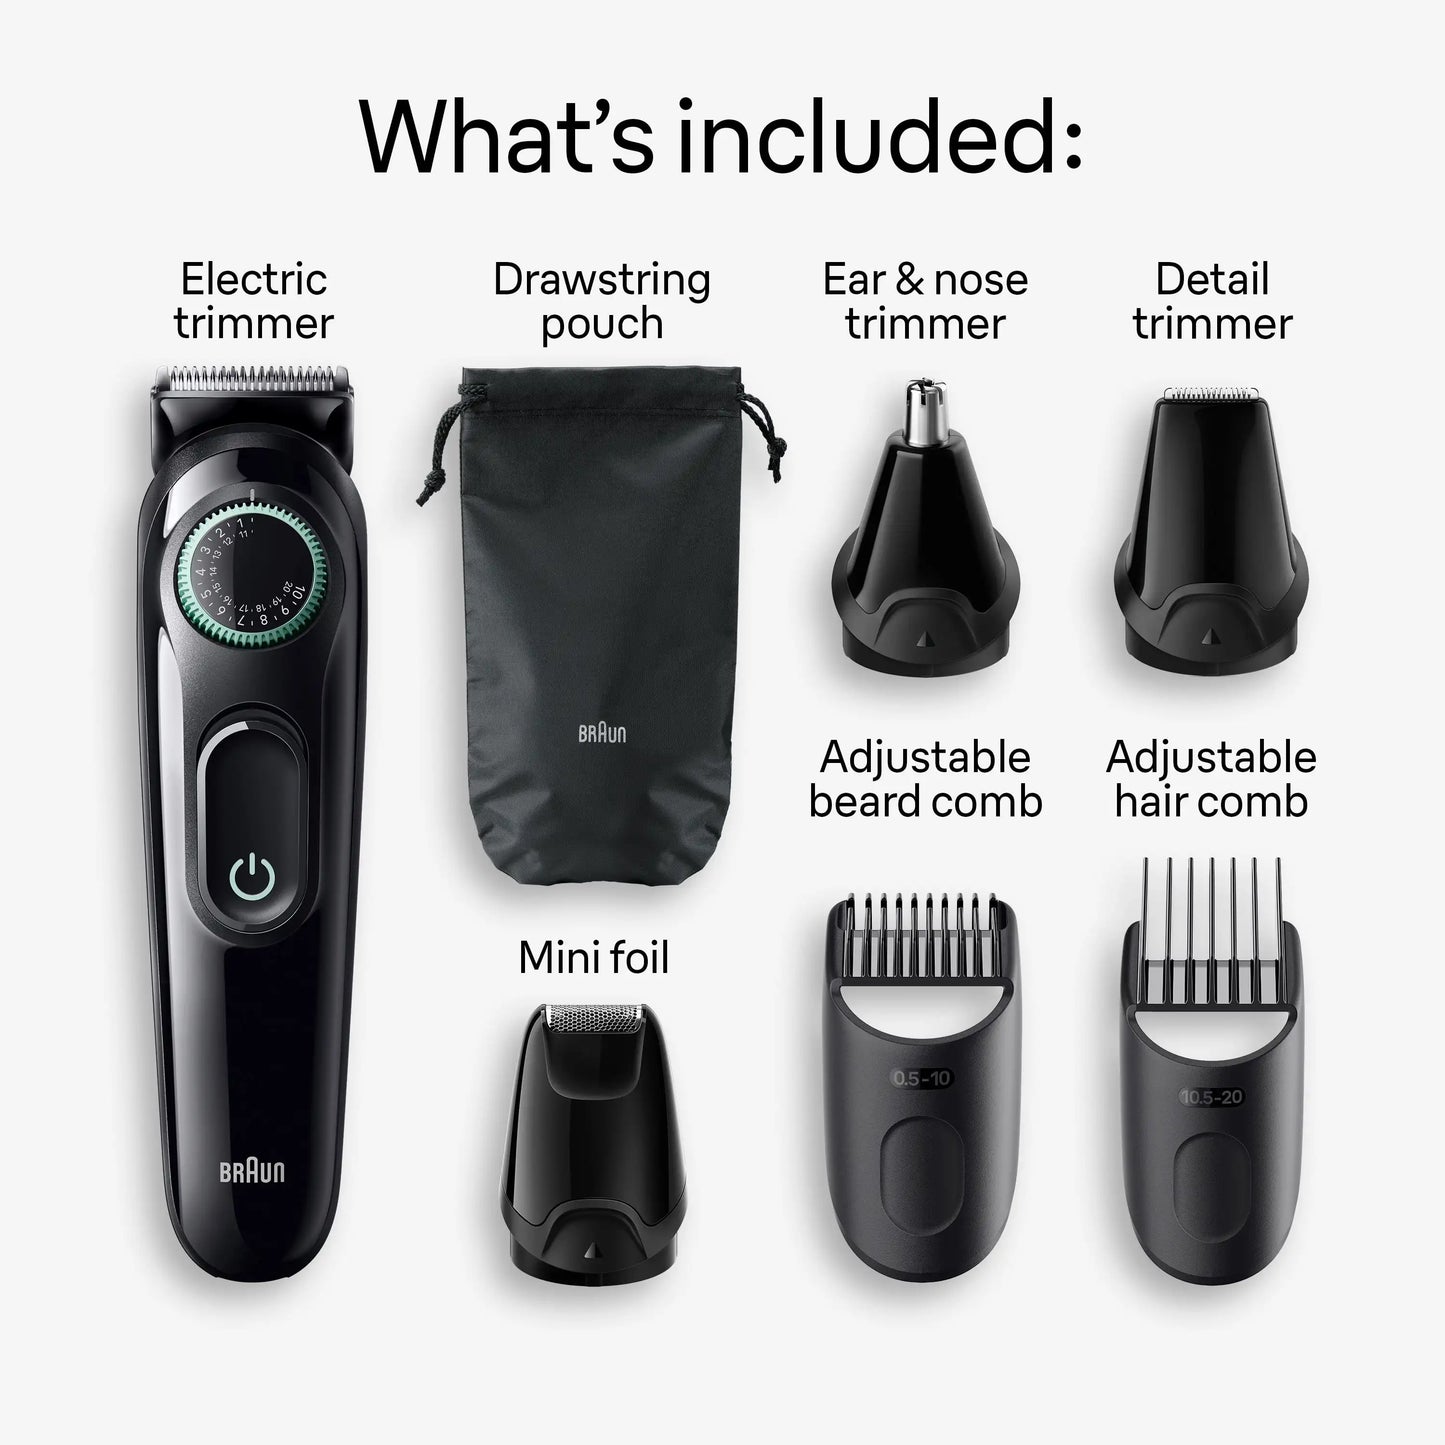 Braun Series 3 3470 All-in-One 7-in-1 Electric Grooming Kit